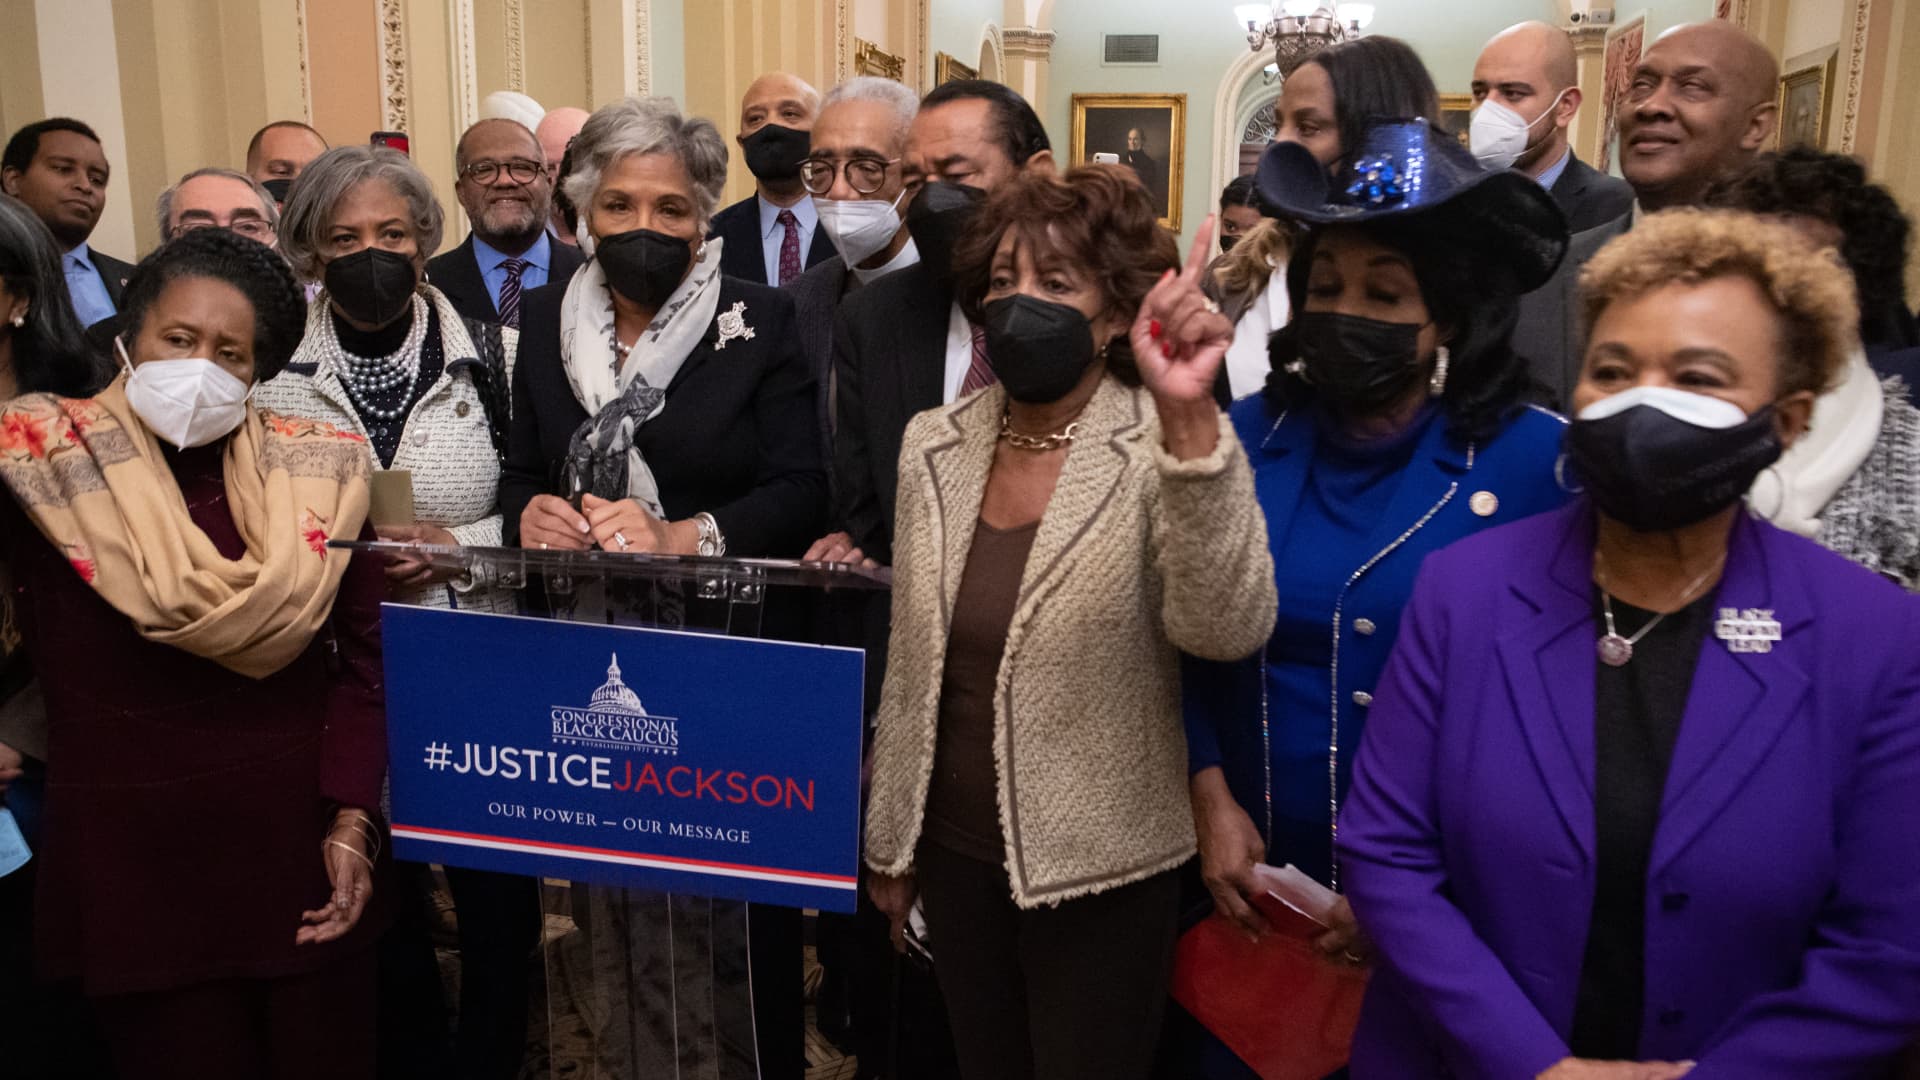 Members of the House Congressional Black Caucus speak after the successful confirmation of Judge Ketanji Brown Jackson as the first Black woman ever to serve on the Supreme Court, at the US Capitol in Washington, DC, April 7, 2022.